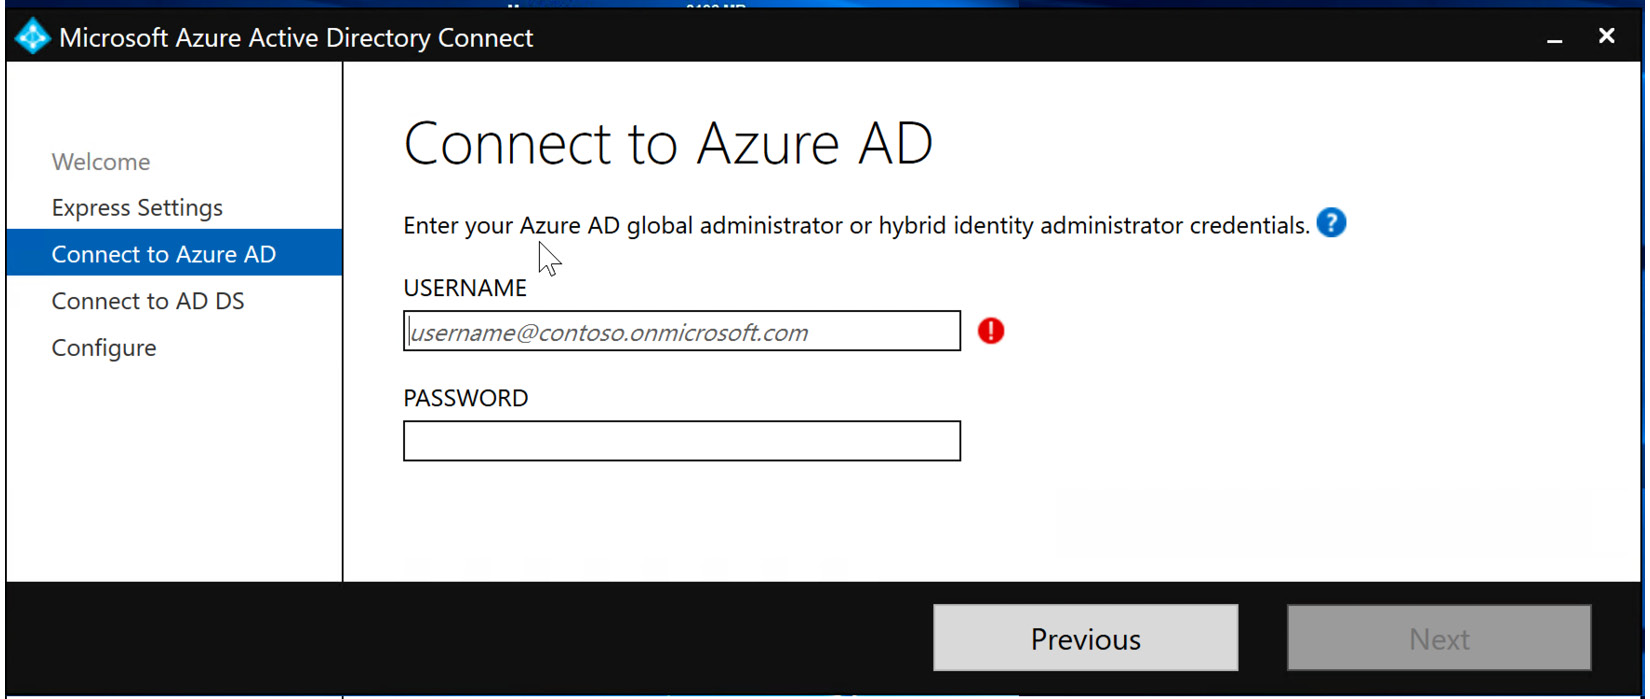 Figure 6.12 – Entering Azure AD global administrator or hybrid identity administrator credentials
